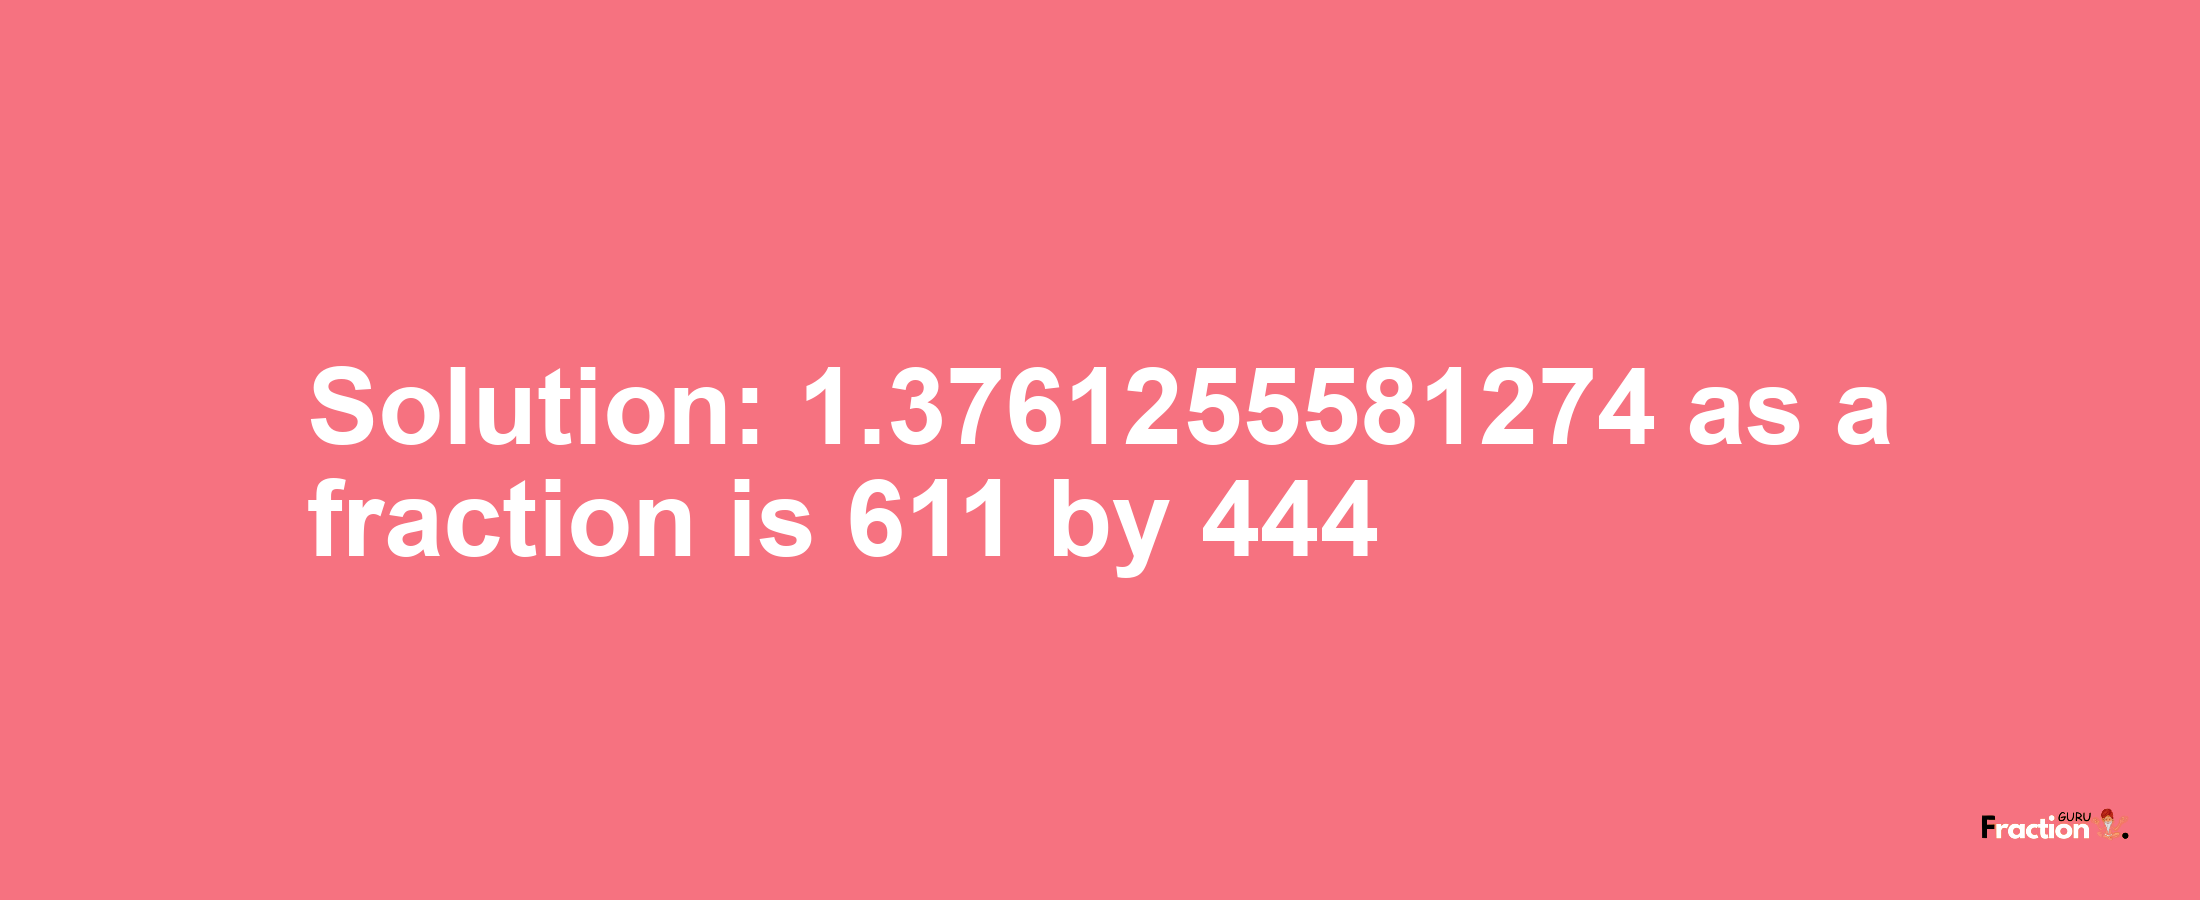 Solution:1.3761255581274 as a fraction is 611/444